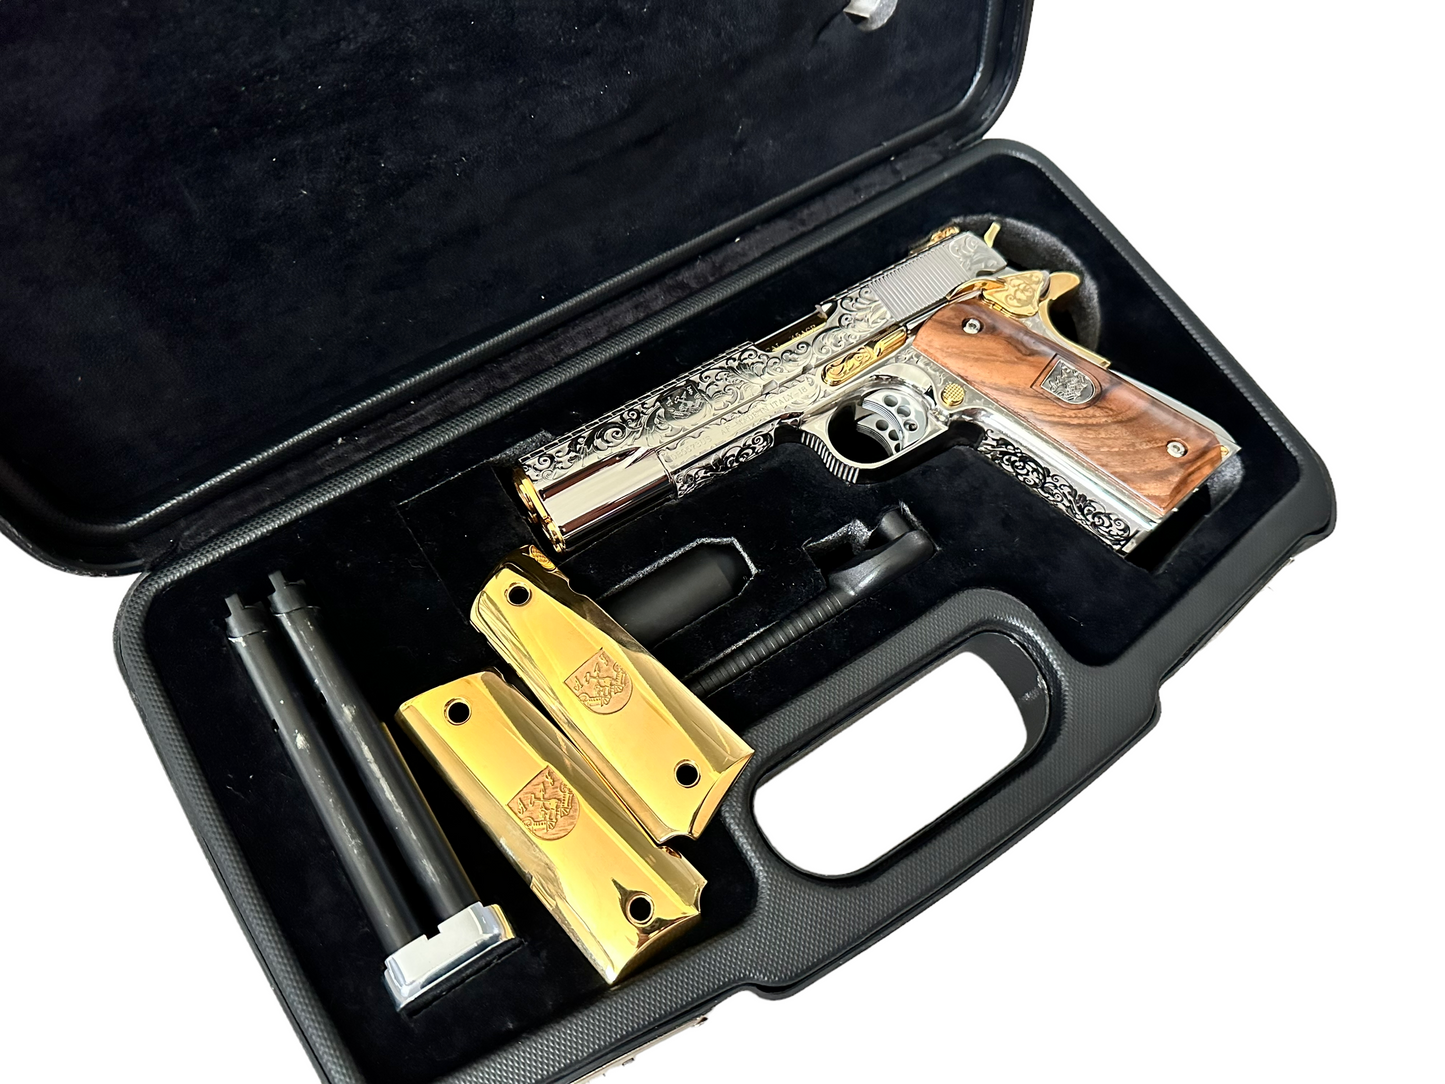 ARSENAL DOUBLE BARREL STANDARD 45ACP CUSTOM WITH RARE DISPLAY CASE 1 OF 1 (PRE-OWNED)